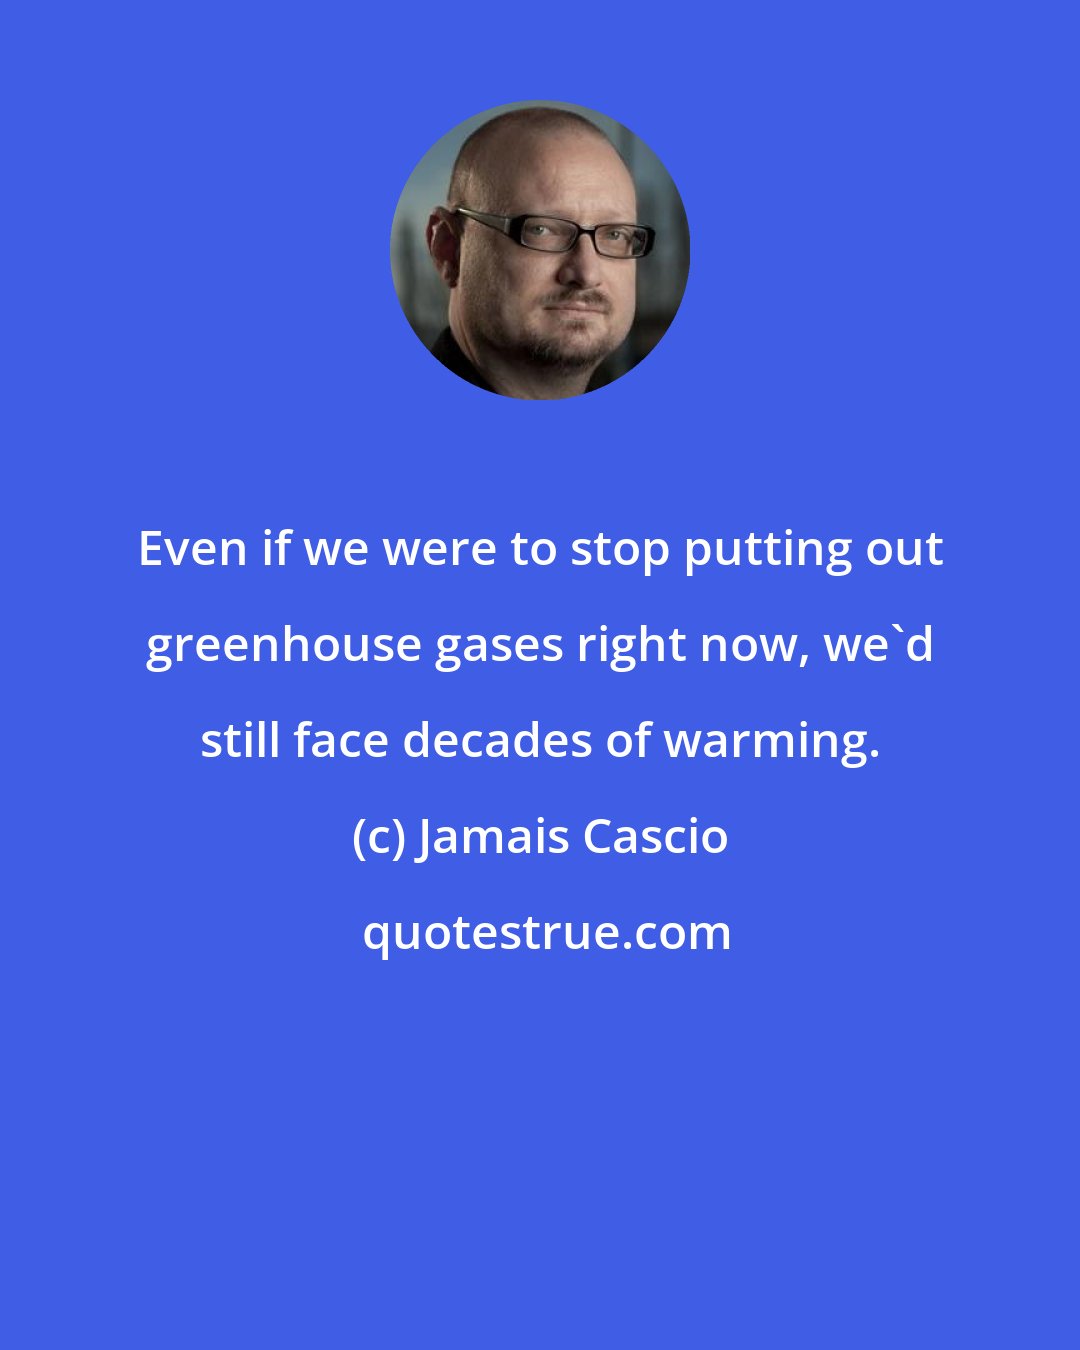 Jamais Cascio: Even if we were to stop putting out greenhouse gases right now, we'd still face decades of warming.